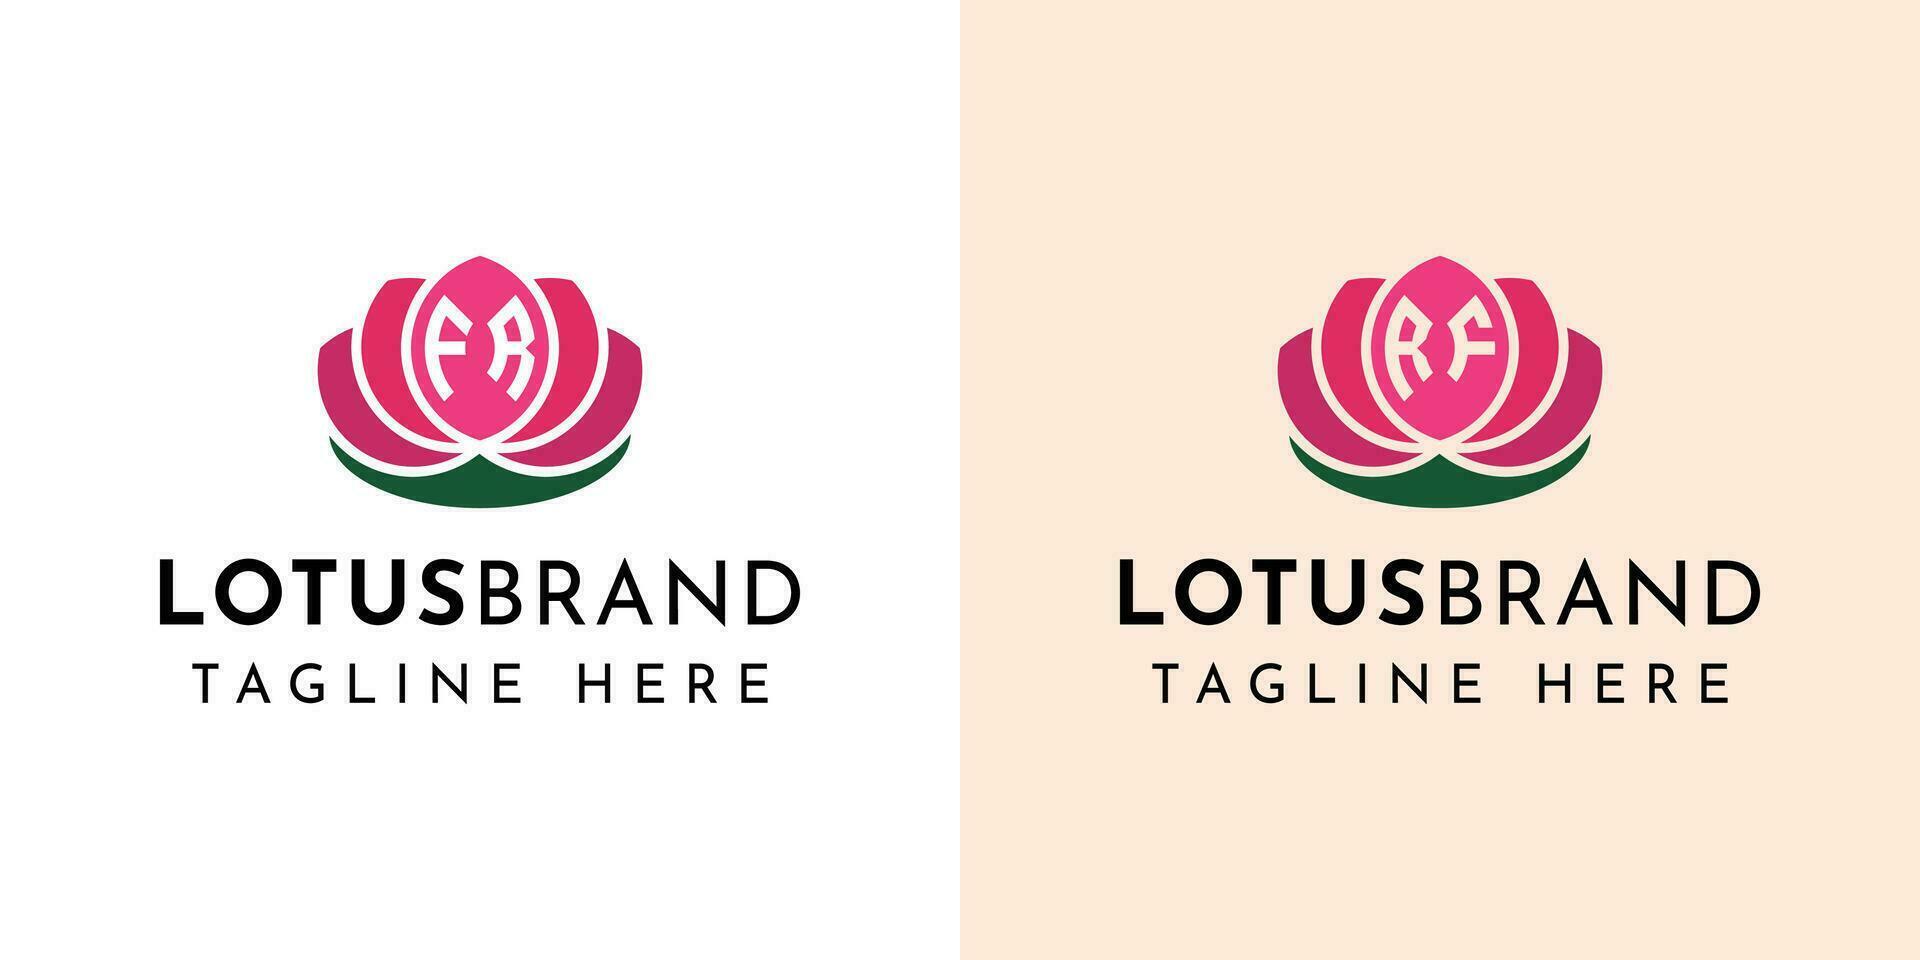 Letter FR and RF Lotus Logo Set, suitable for business related to lotus flowers with FR or RF initials. vector